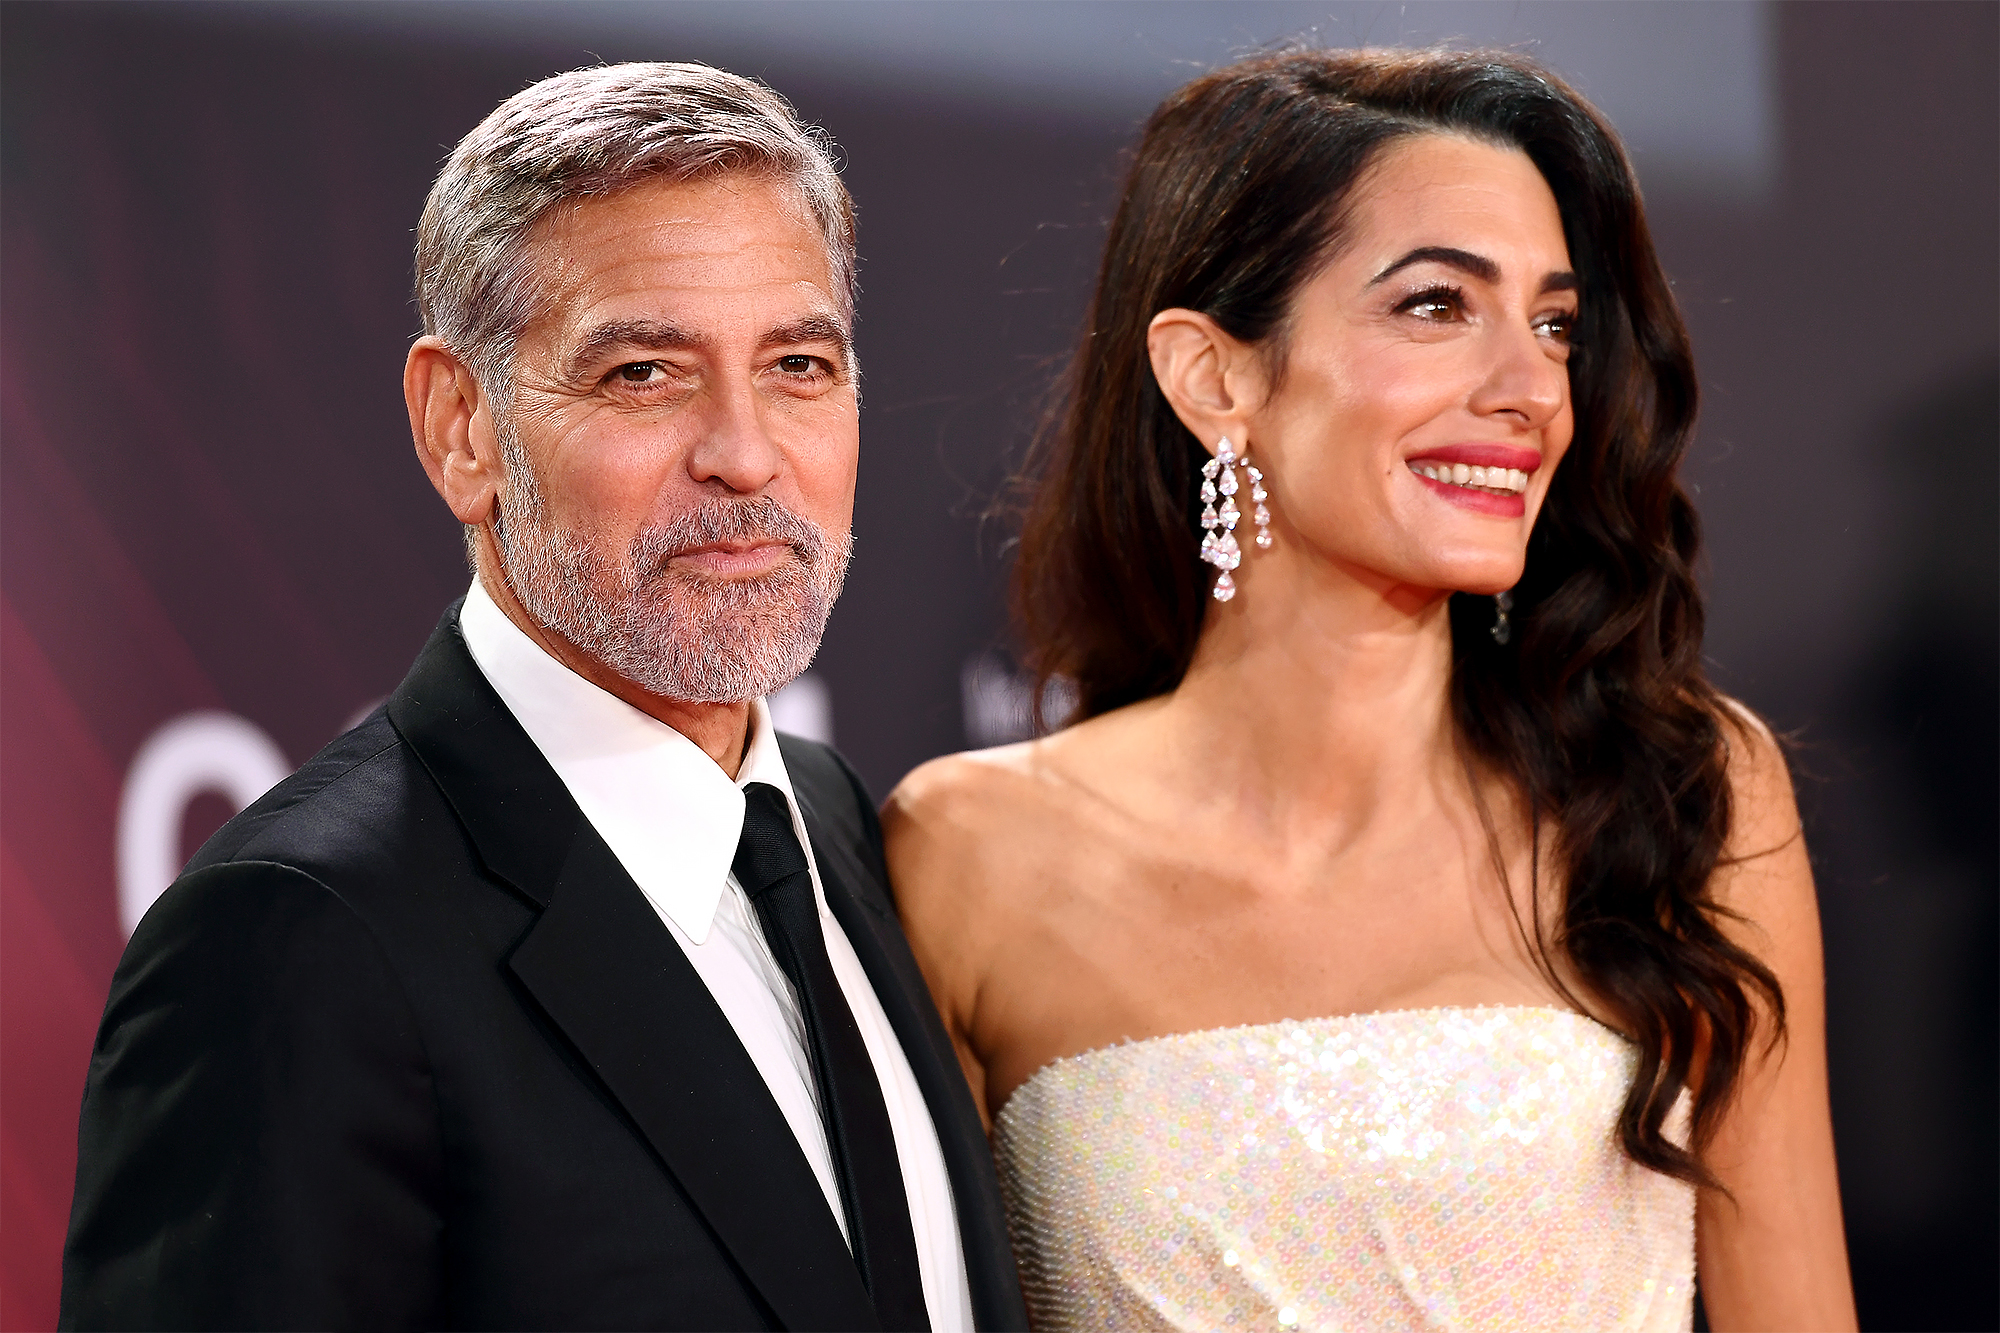 George Clooney and Wife Amal Take Turns When Parenting Twins